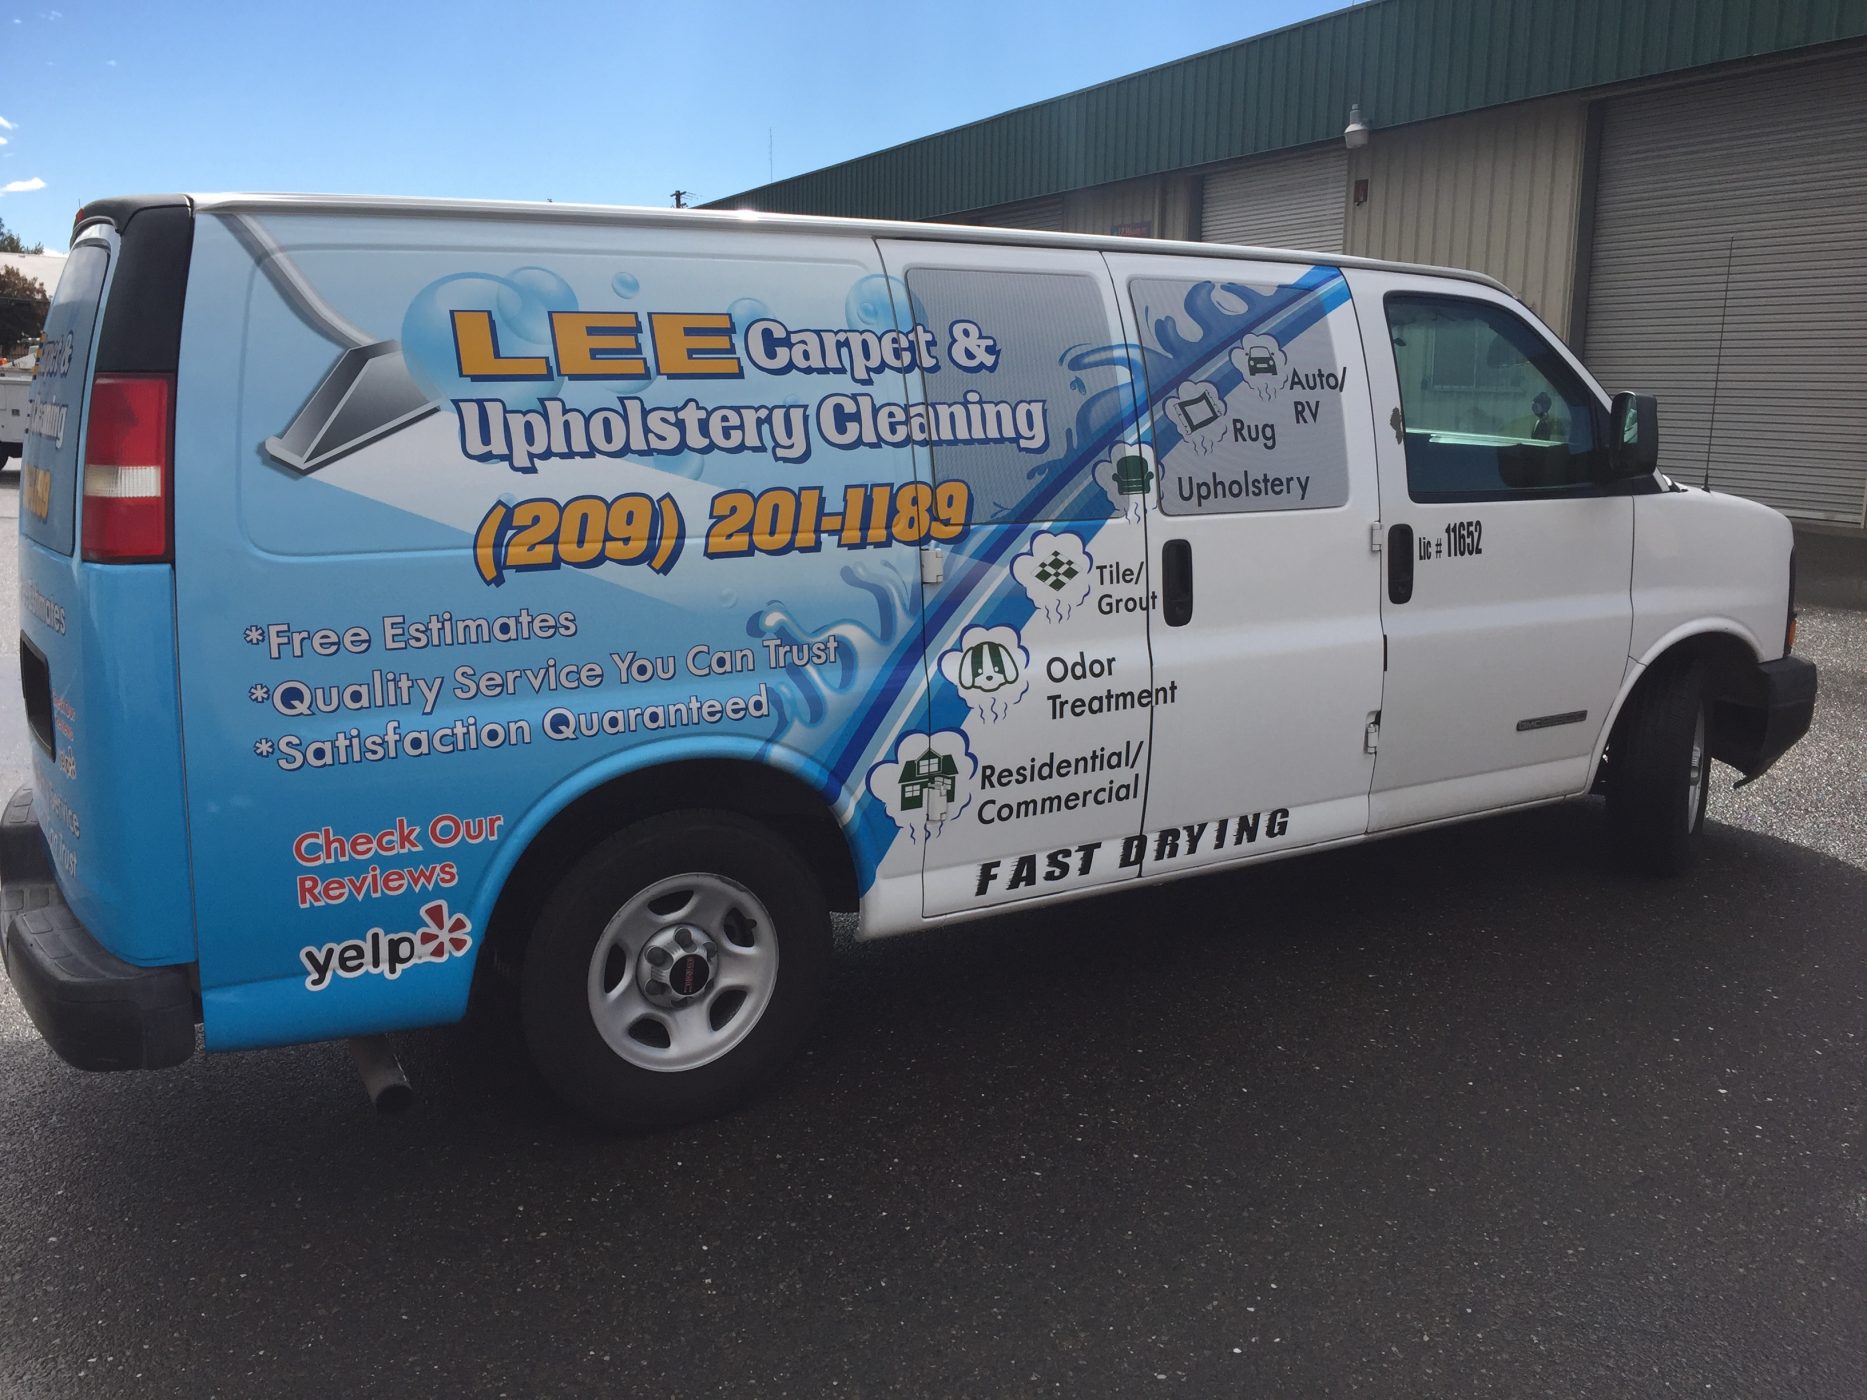 Commercial Vehicle Wrap